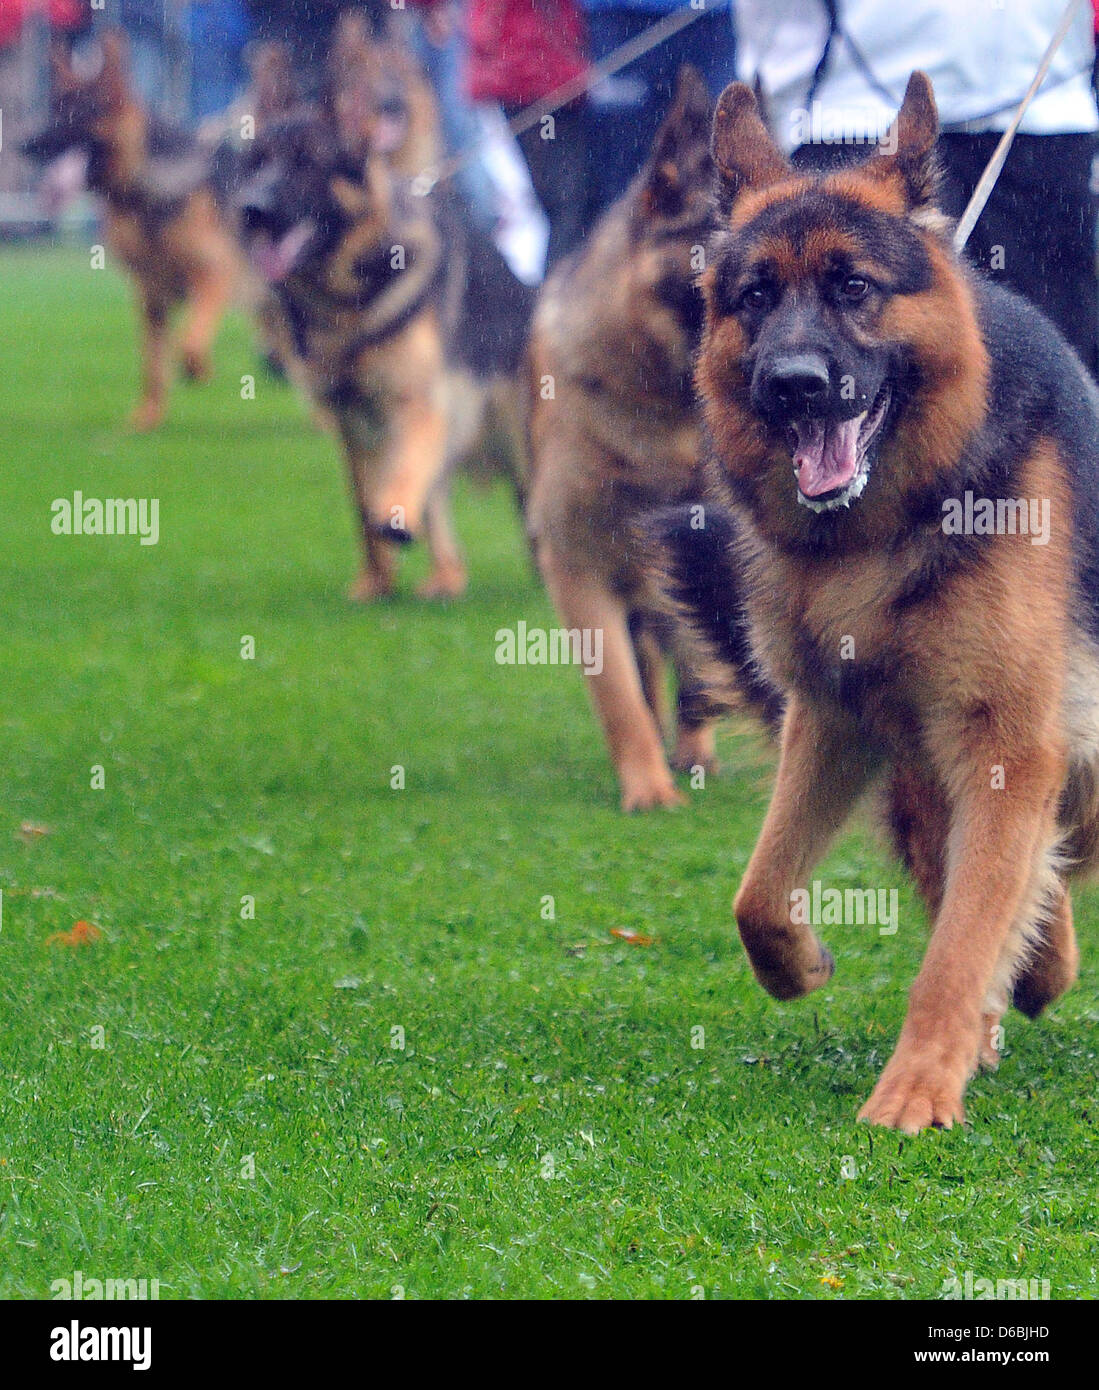 German shepherds are presented at the World Championship of German shepherds  initiated by the German shepherd dog association in Ulm, Germany, 01  September 2012. More than 1800 pedigree dogs compete for the